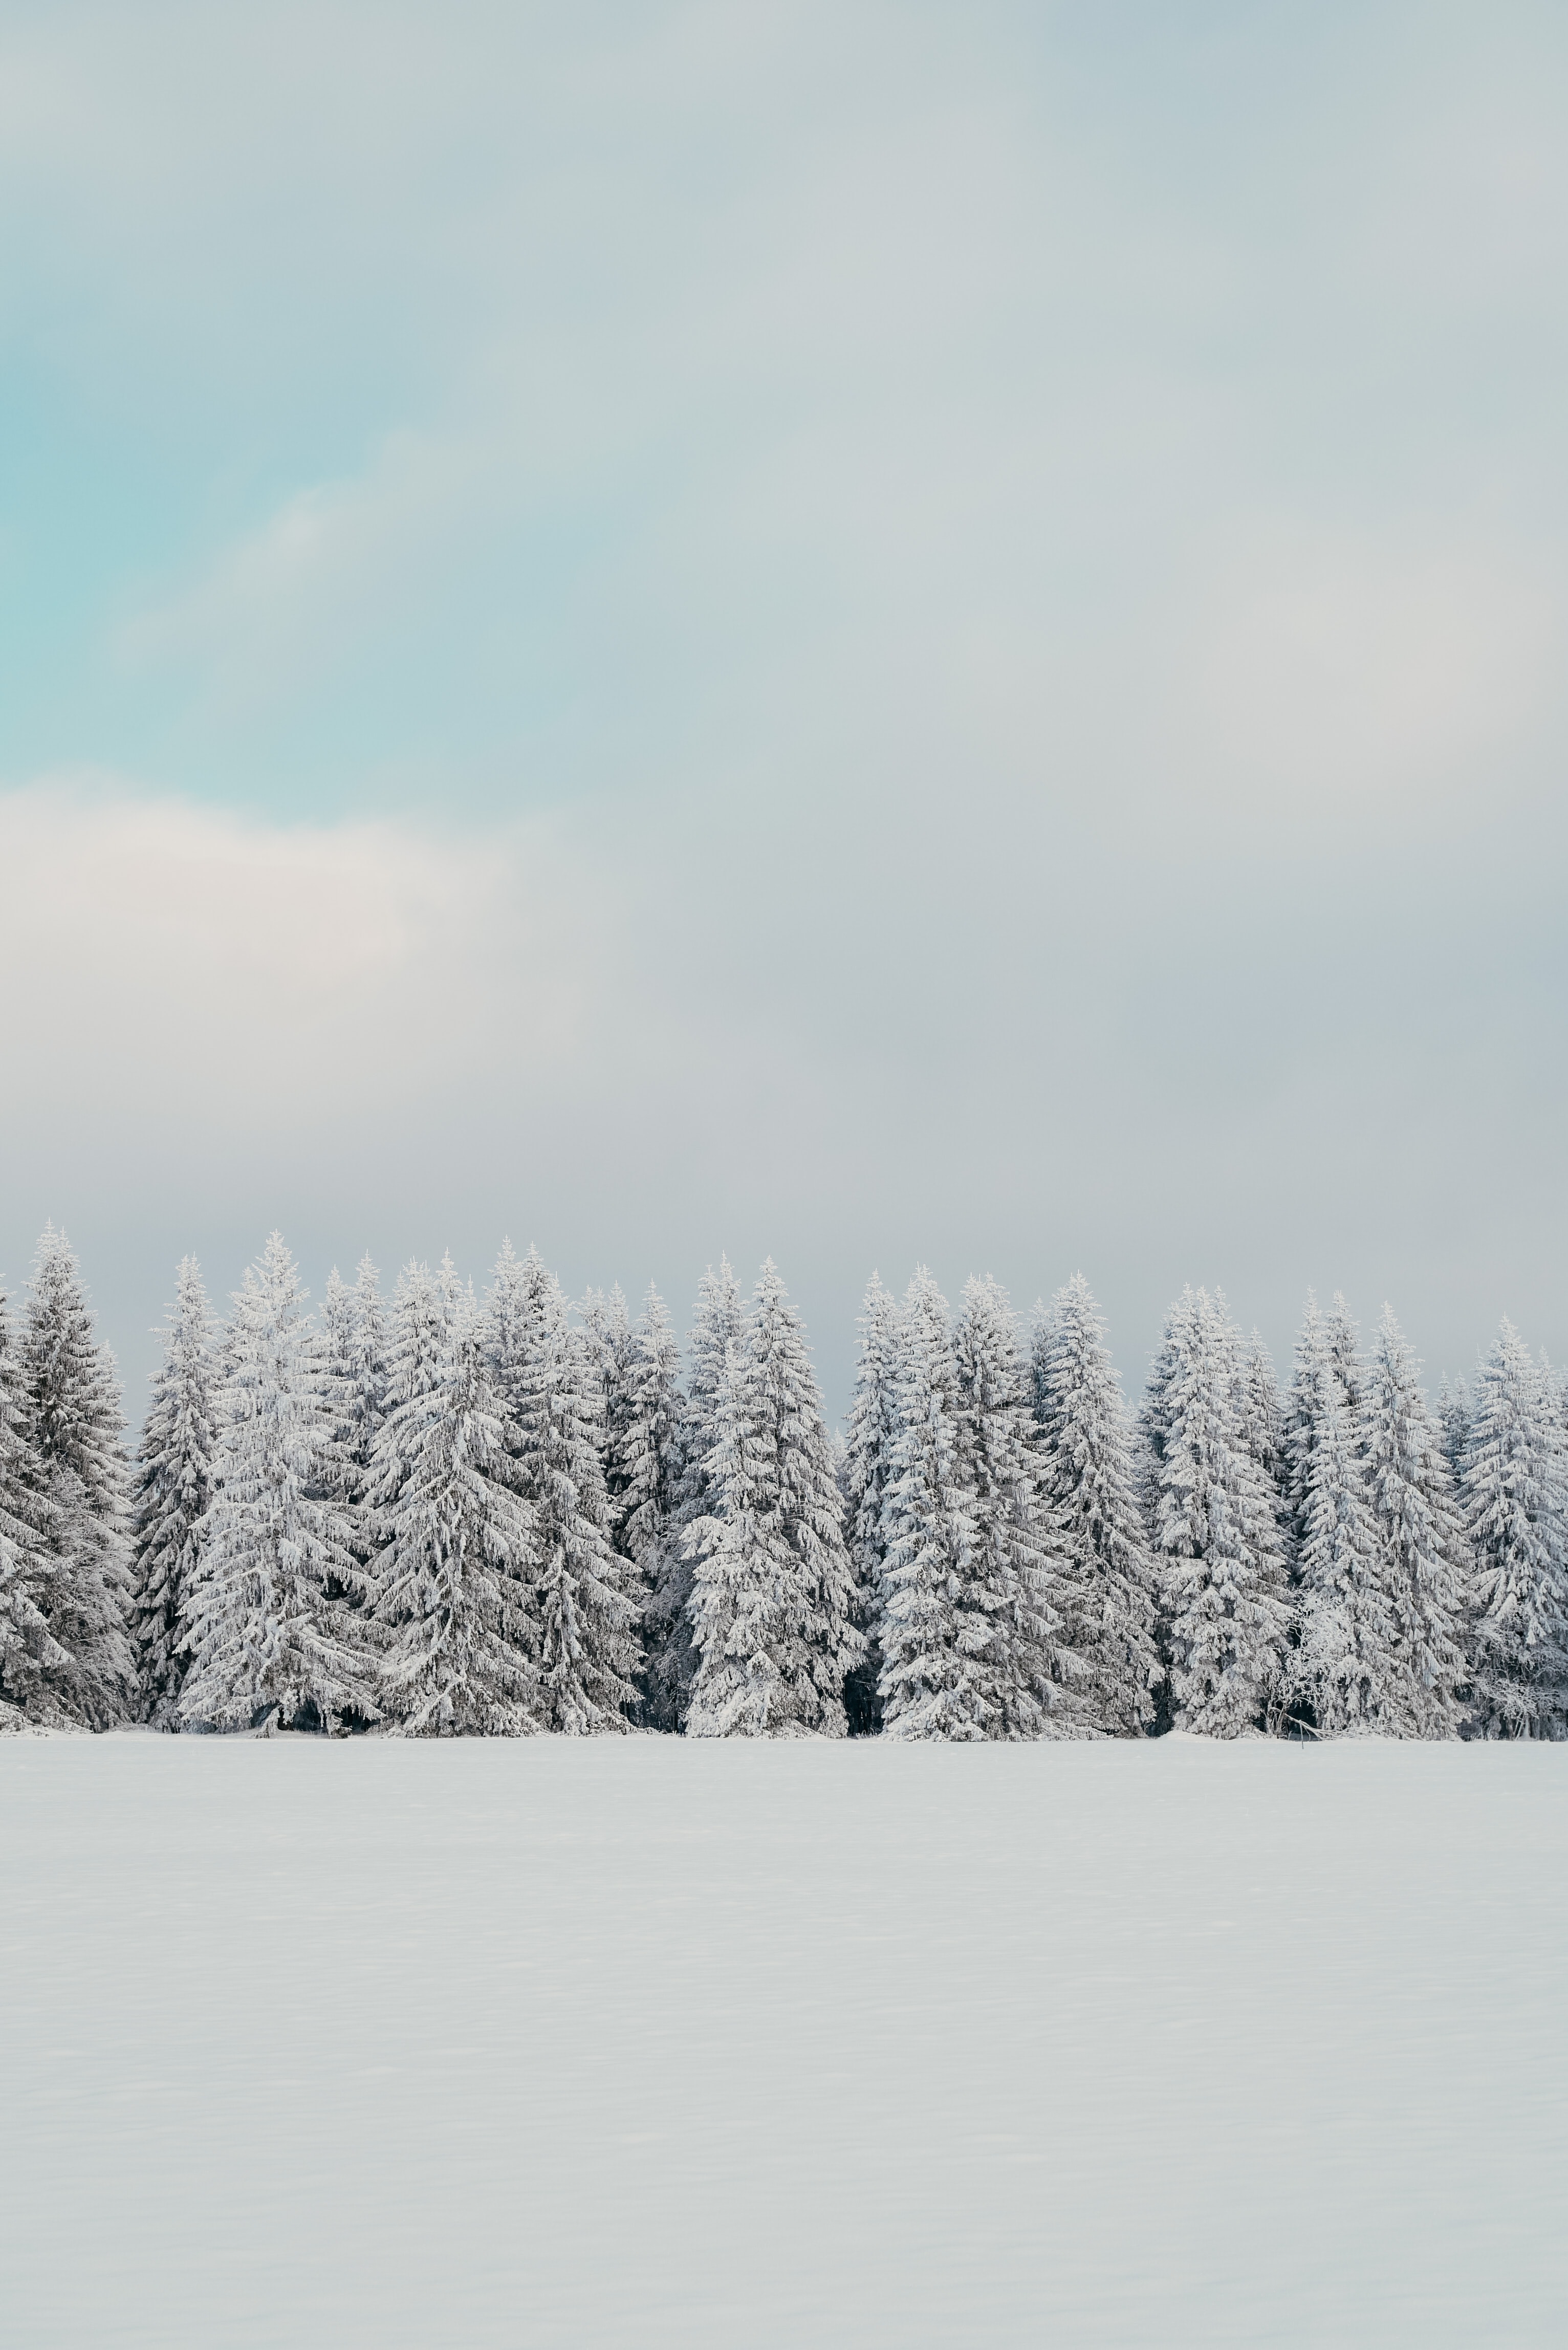 winter, nature, trees, snow, fir trees, white